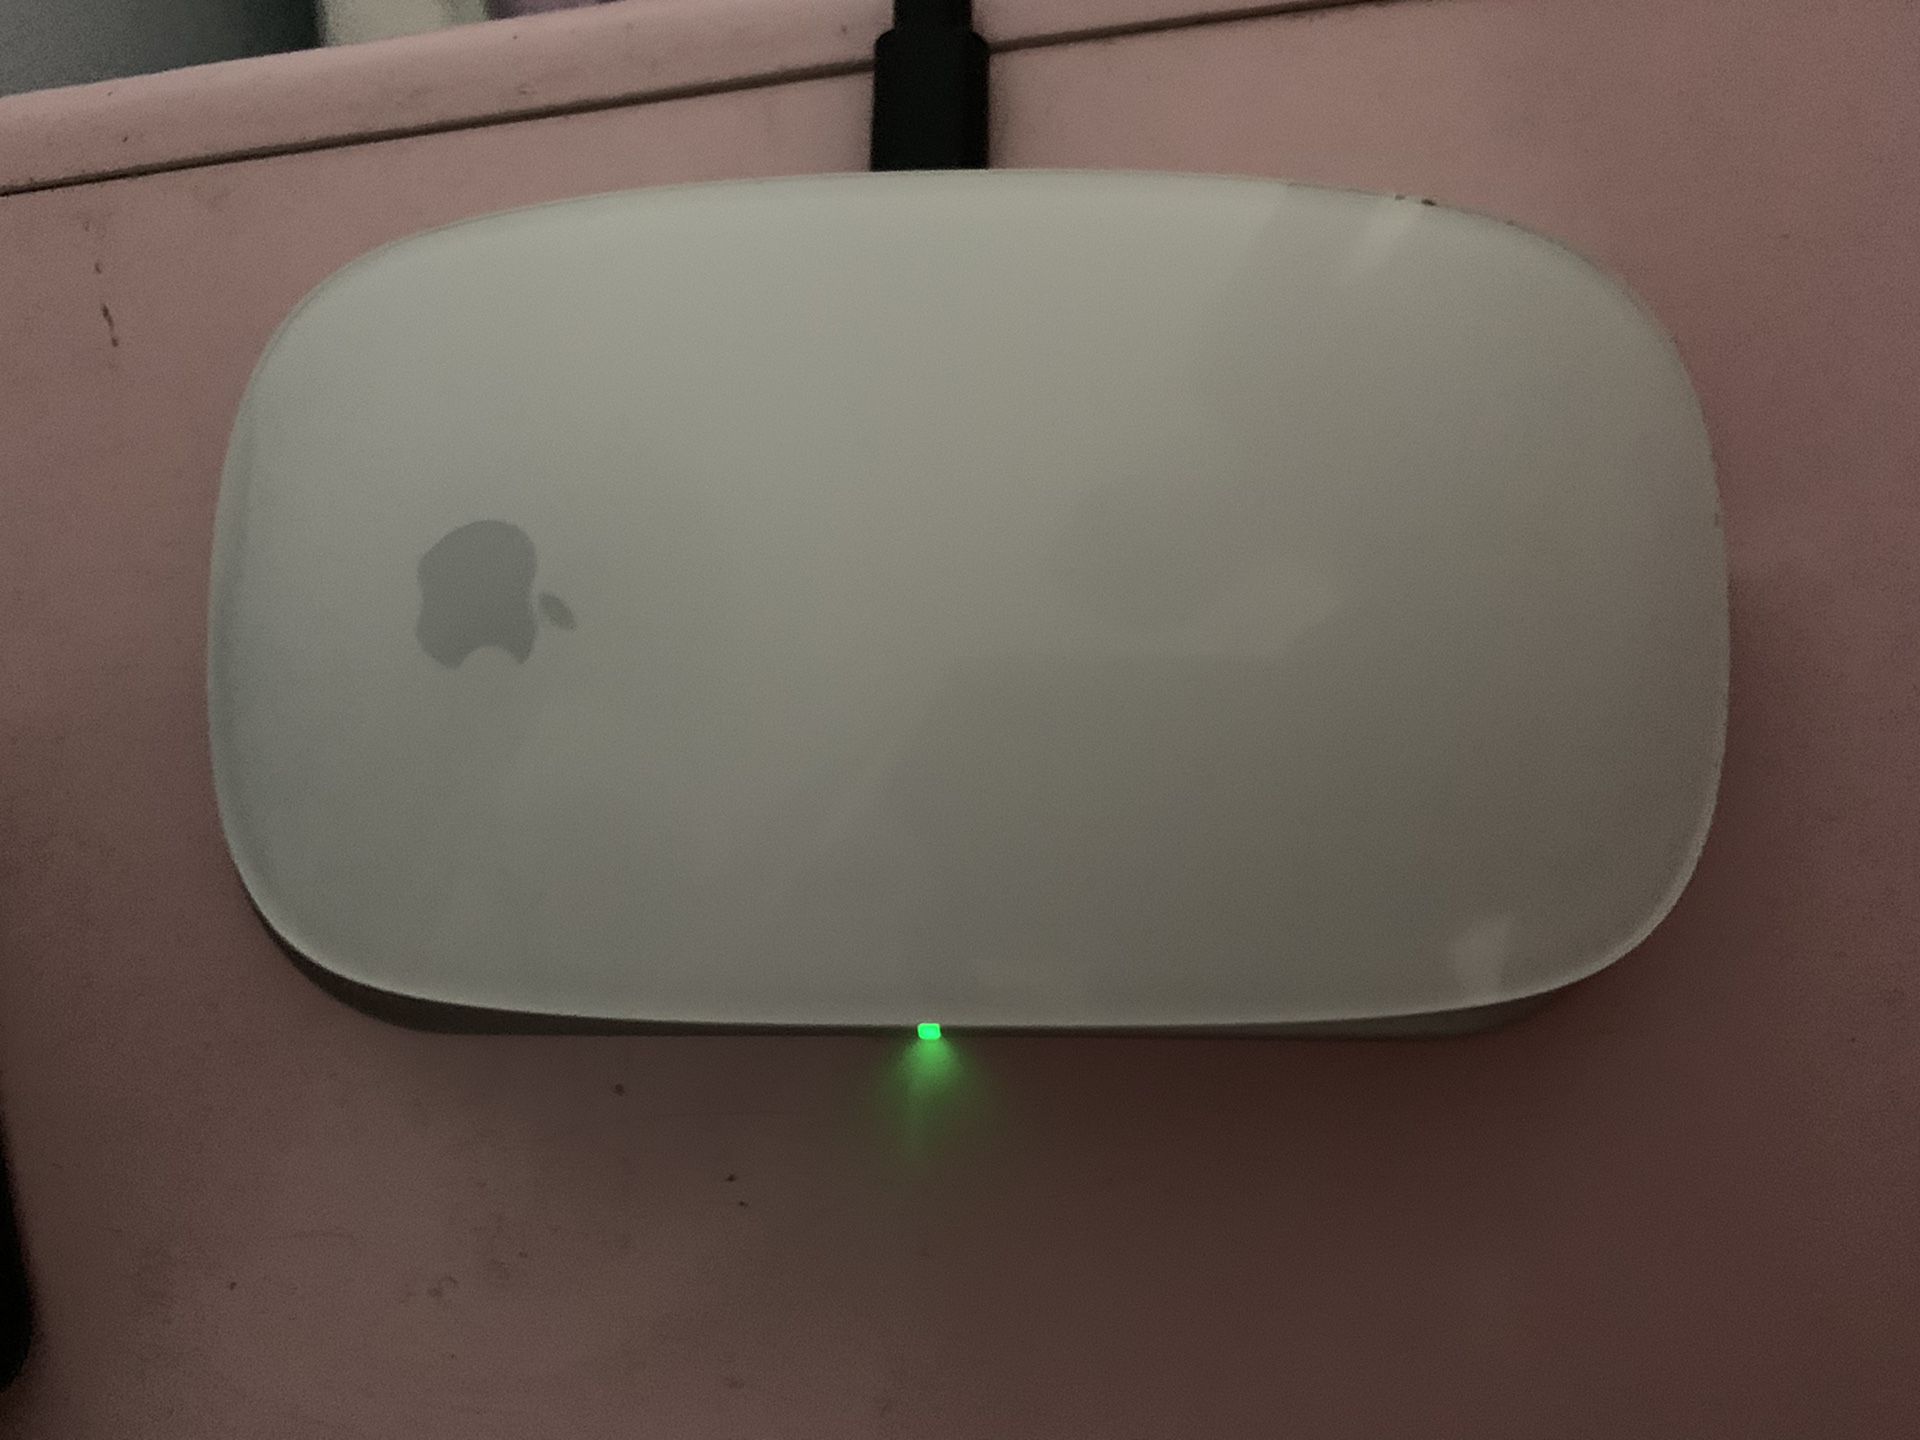 Apple wireless mouse with mobee tech